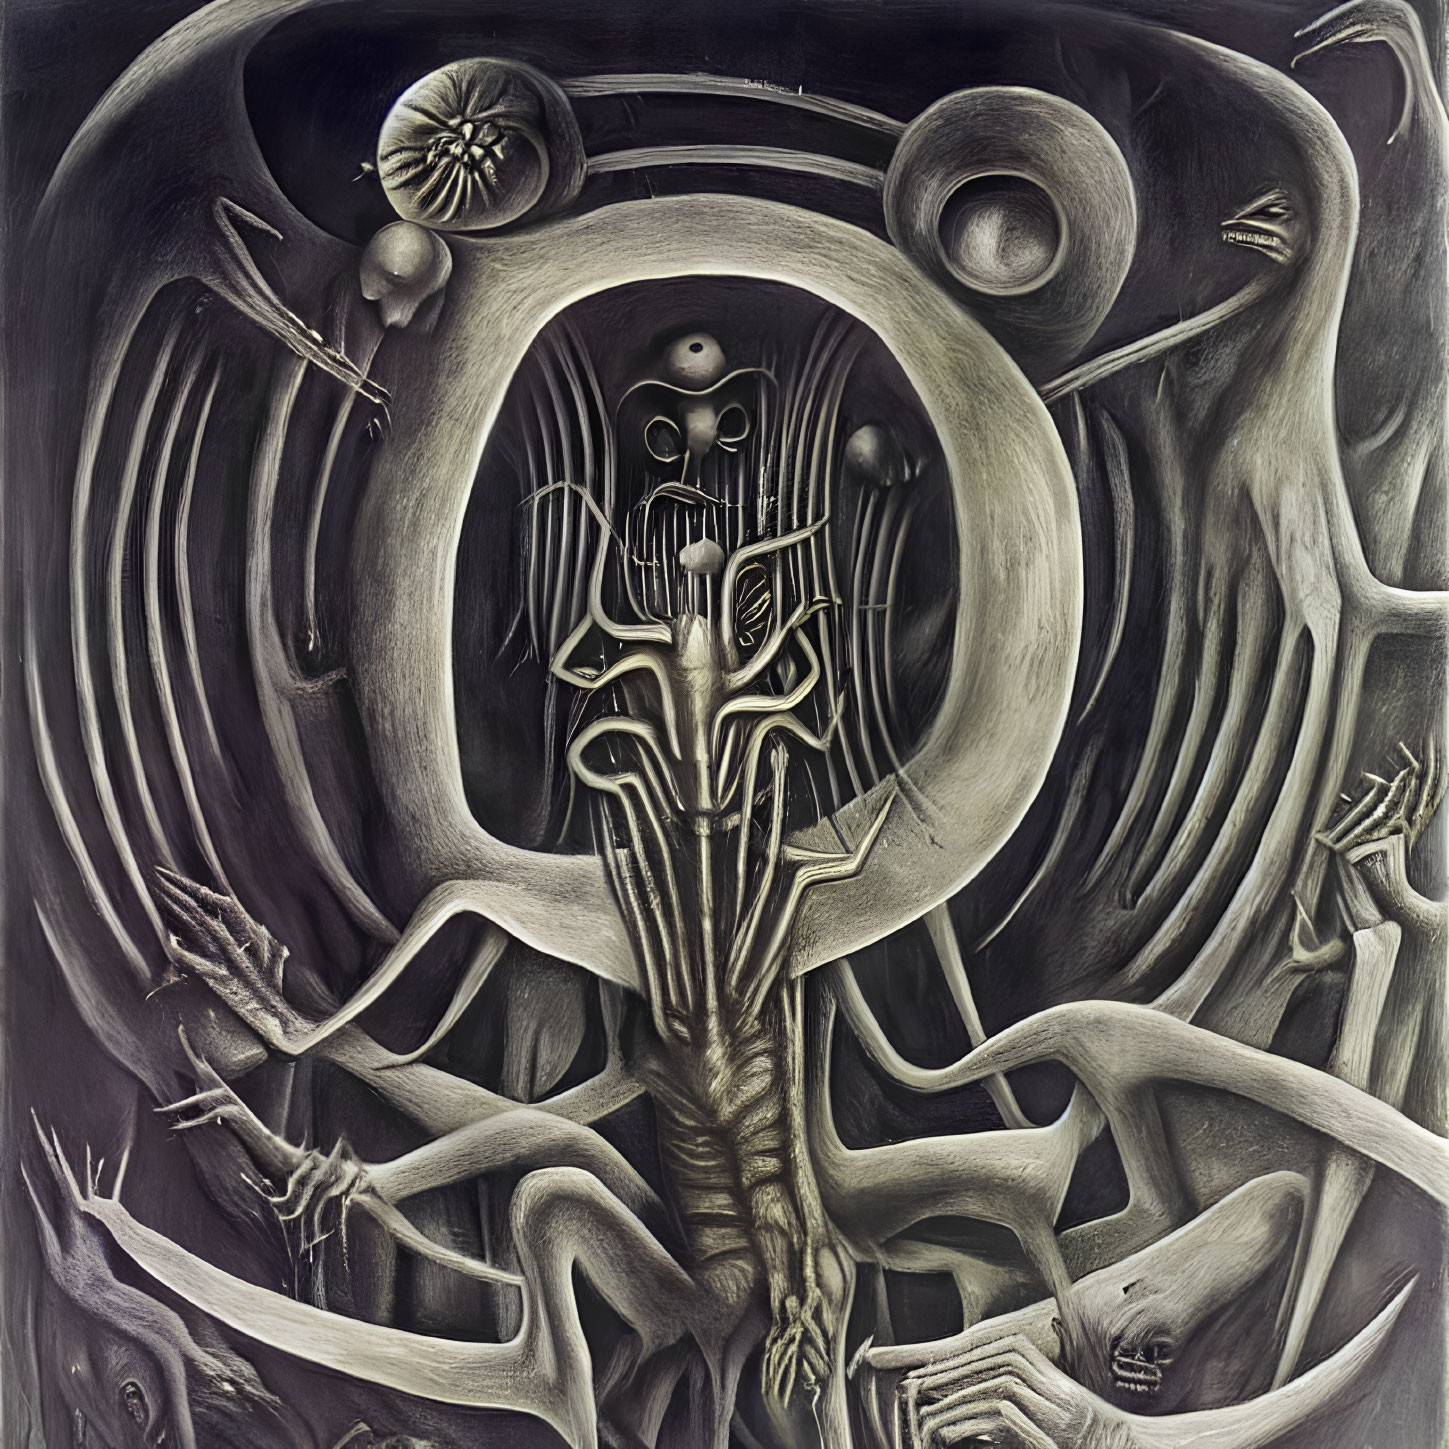 Surrealistic Painting: Skeletal Figures, Abstract Forms, and Humanoid Creature in Eerie